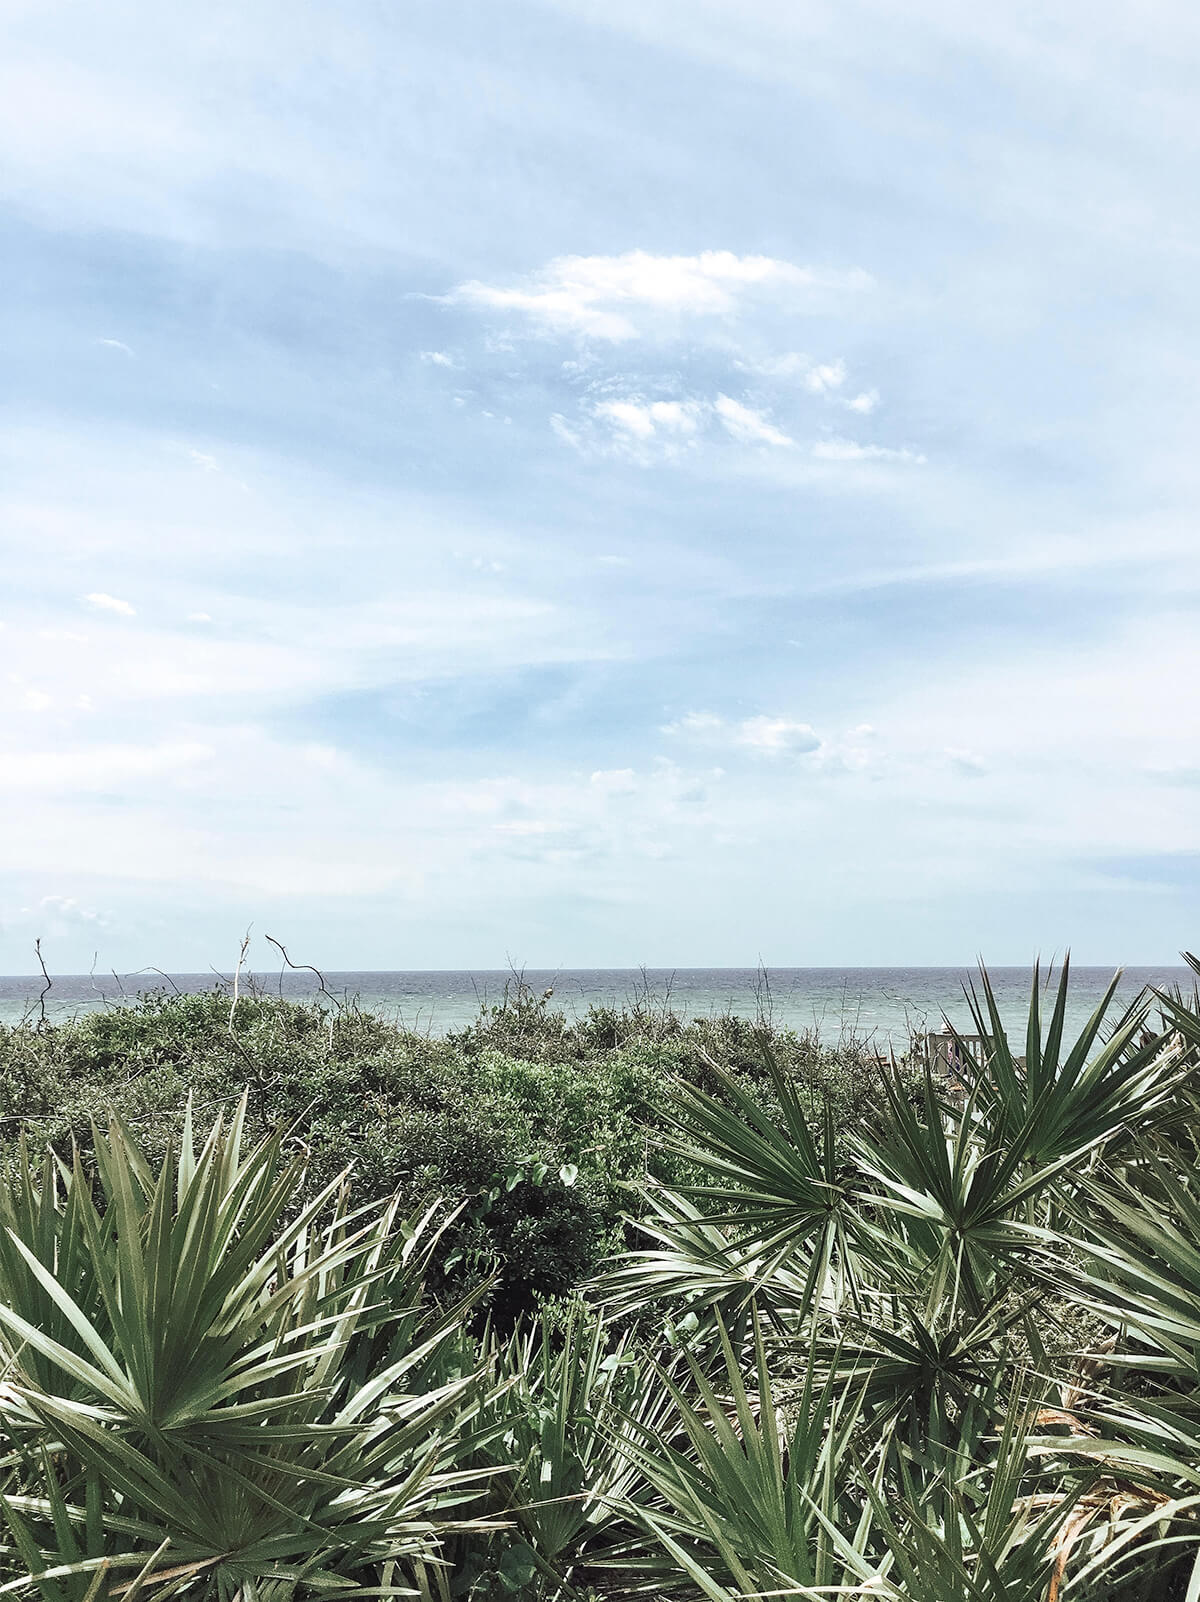 View of palm trees and ocean from coast of Alys Beach, FL